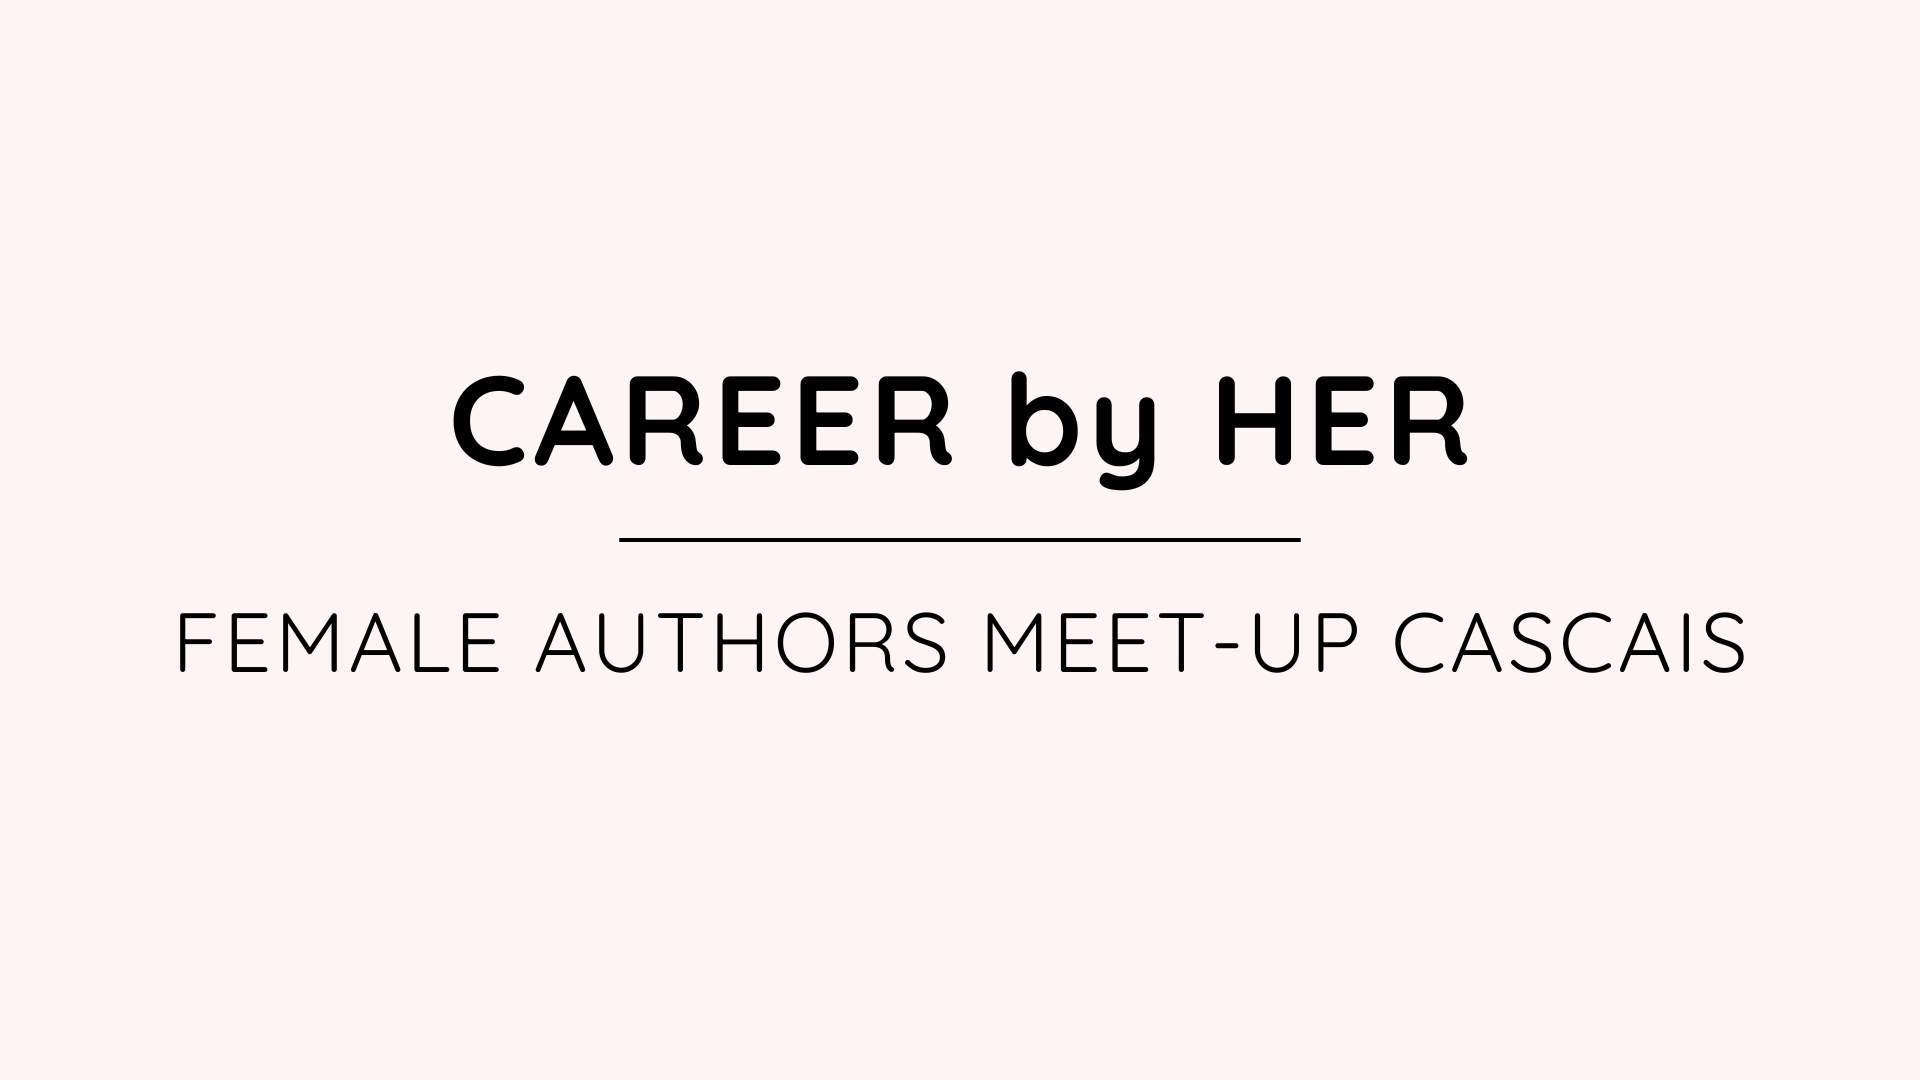 where women connect career by her female authors meet up cascais